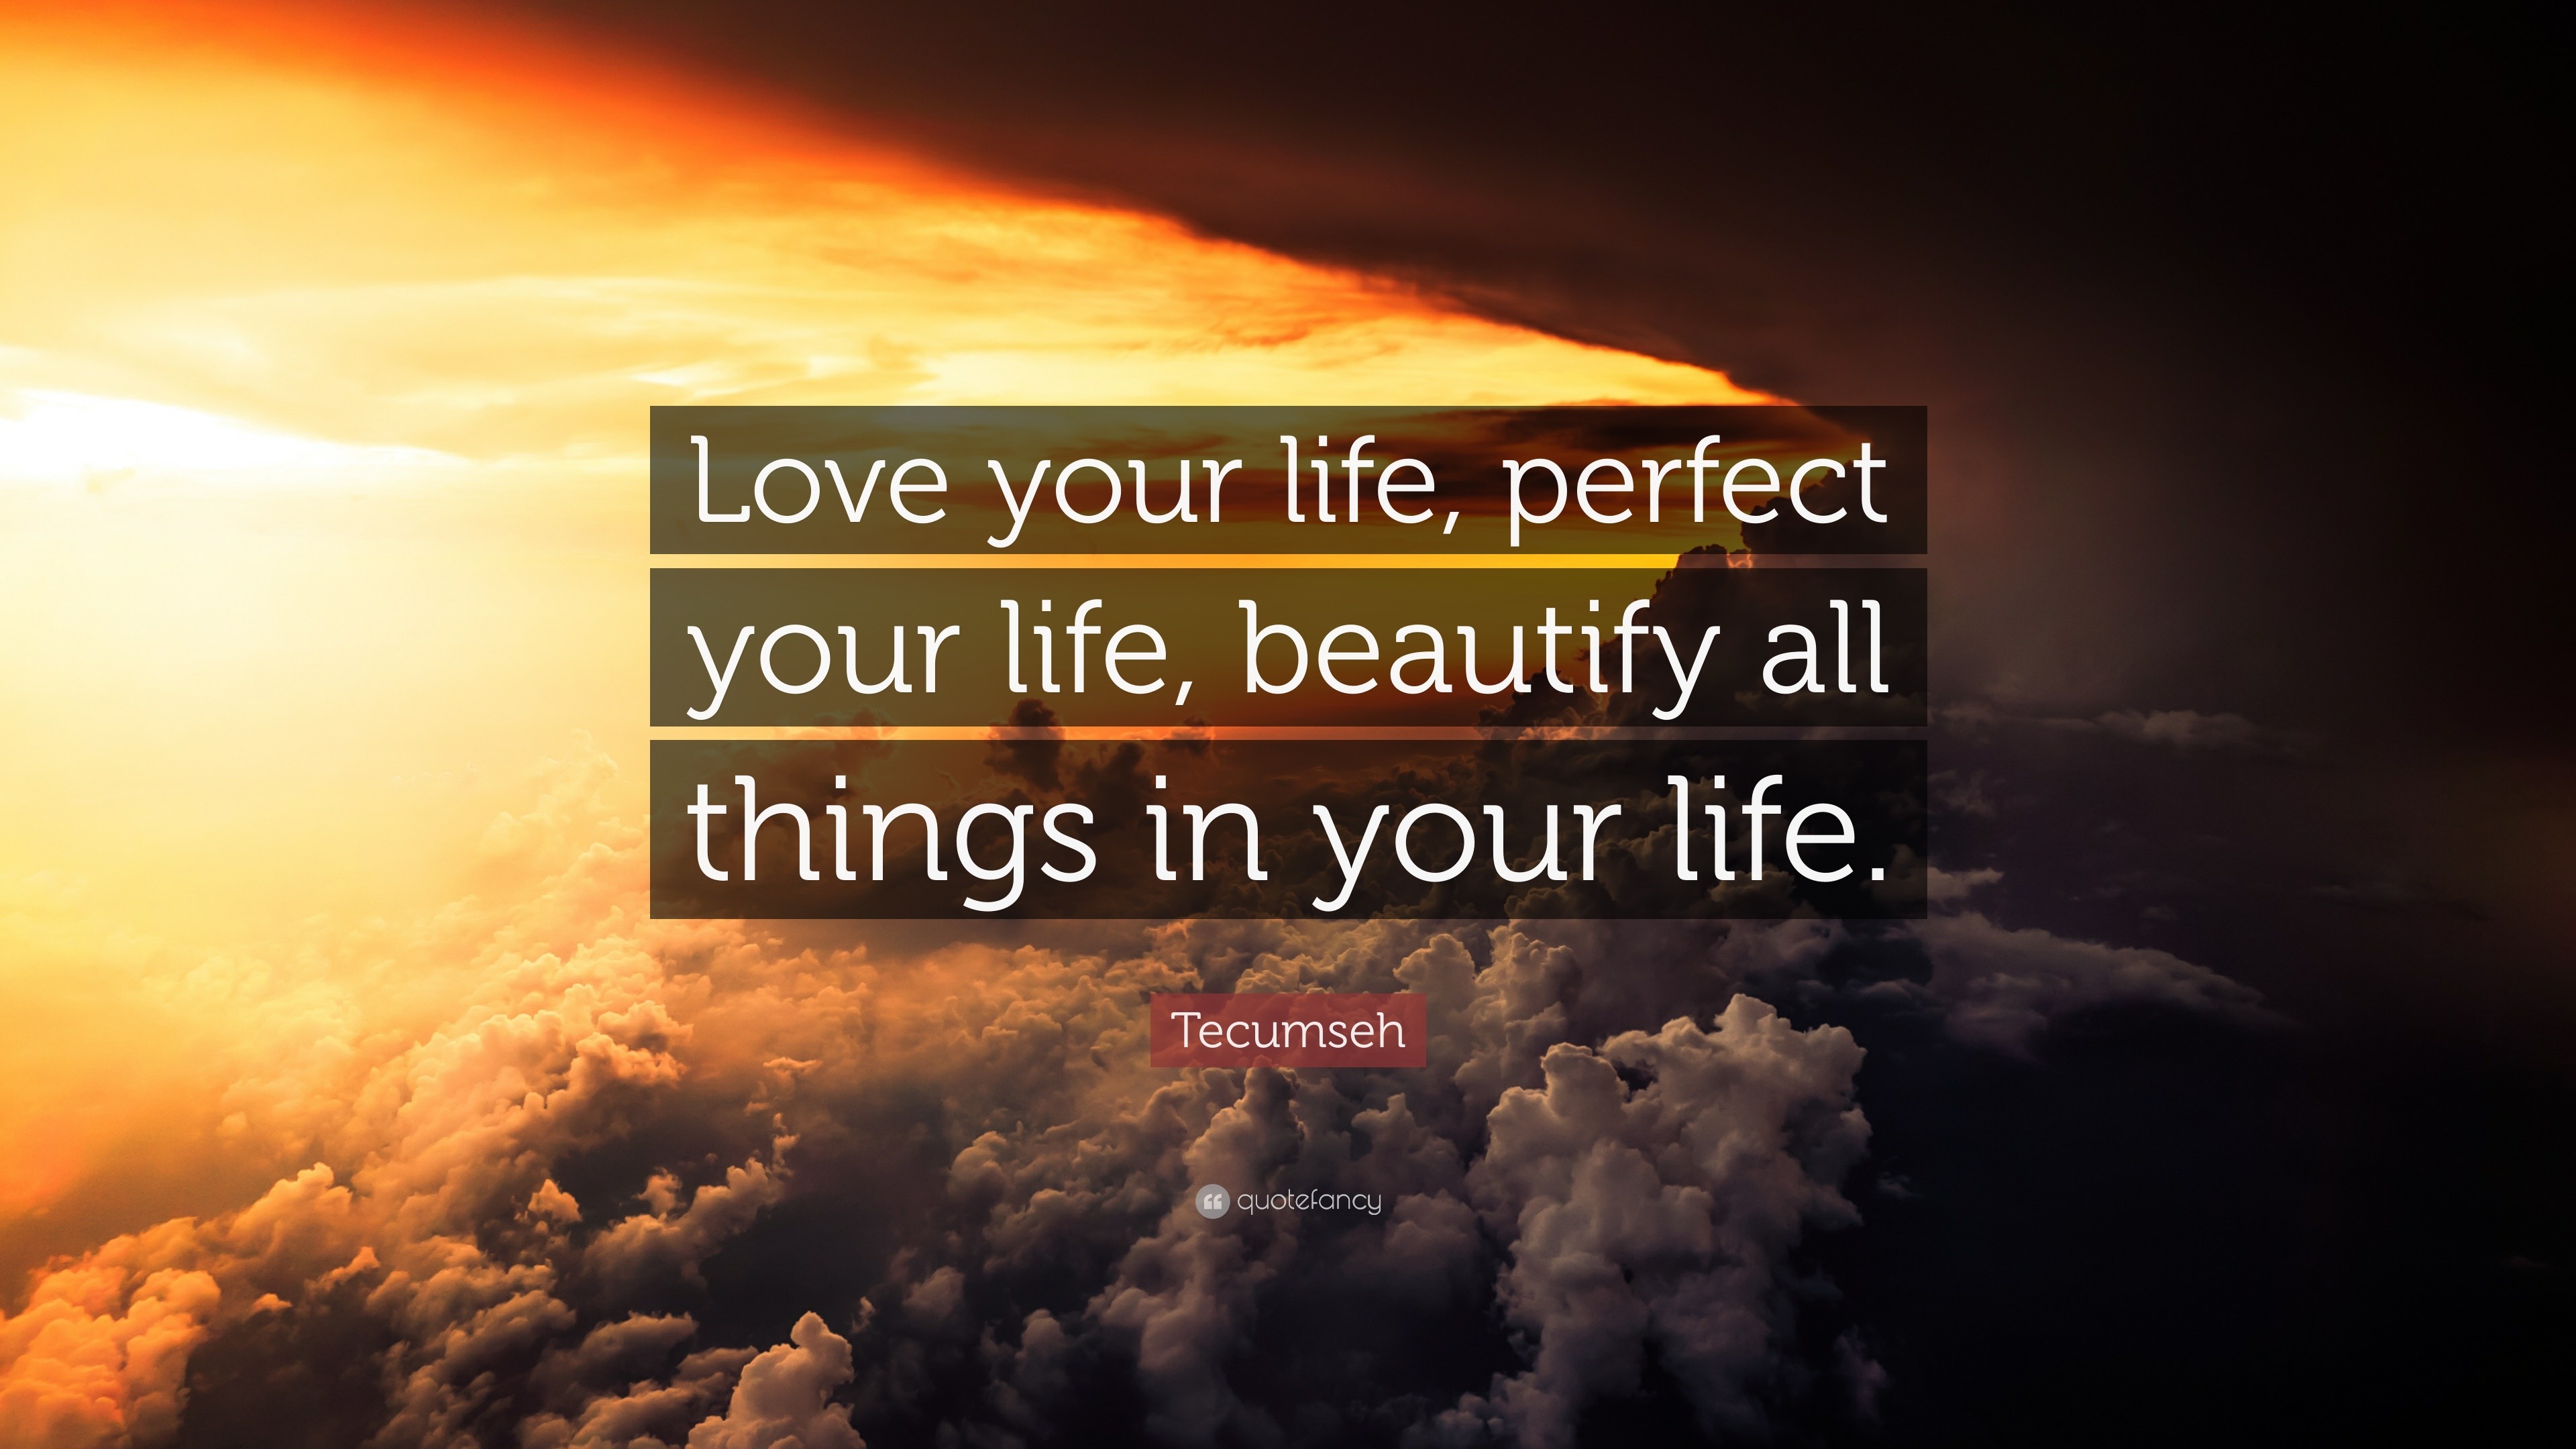 Tecumseh Quote “Love your life perfect your life beautify all things in